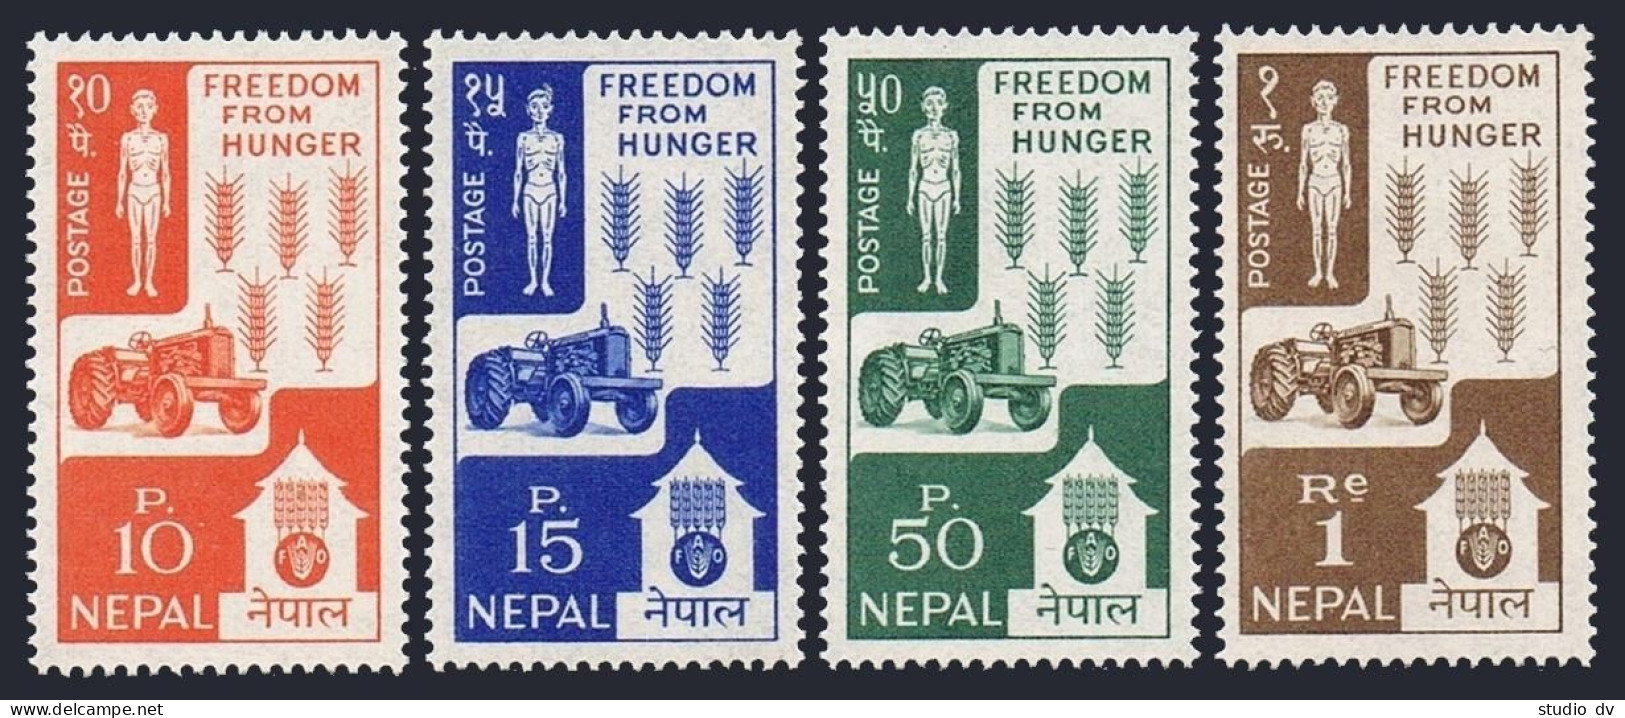 Nepal 159-162, MNH. Mi 168-171. FAO Freedom From Hunger Campaign 1963. Tractor, - Nepal